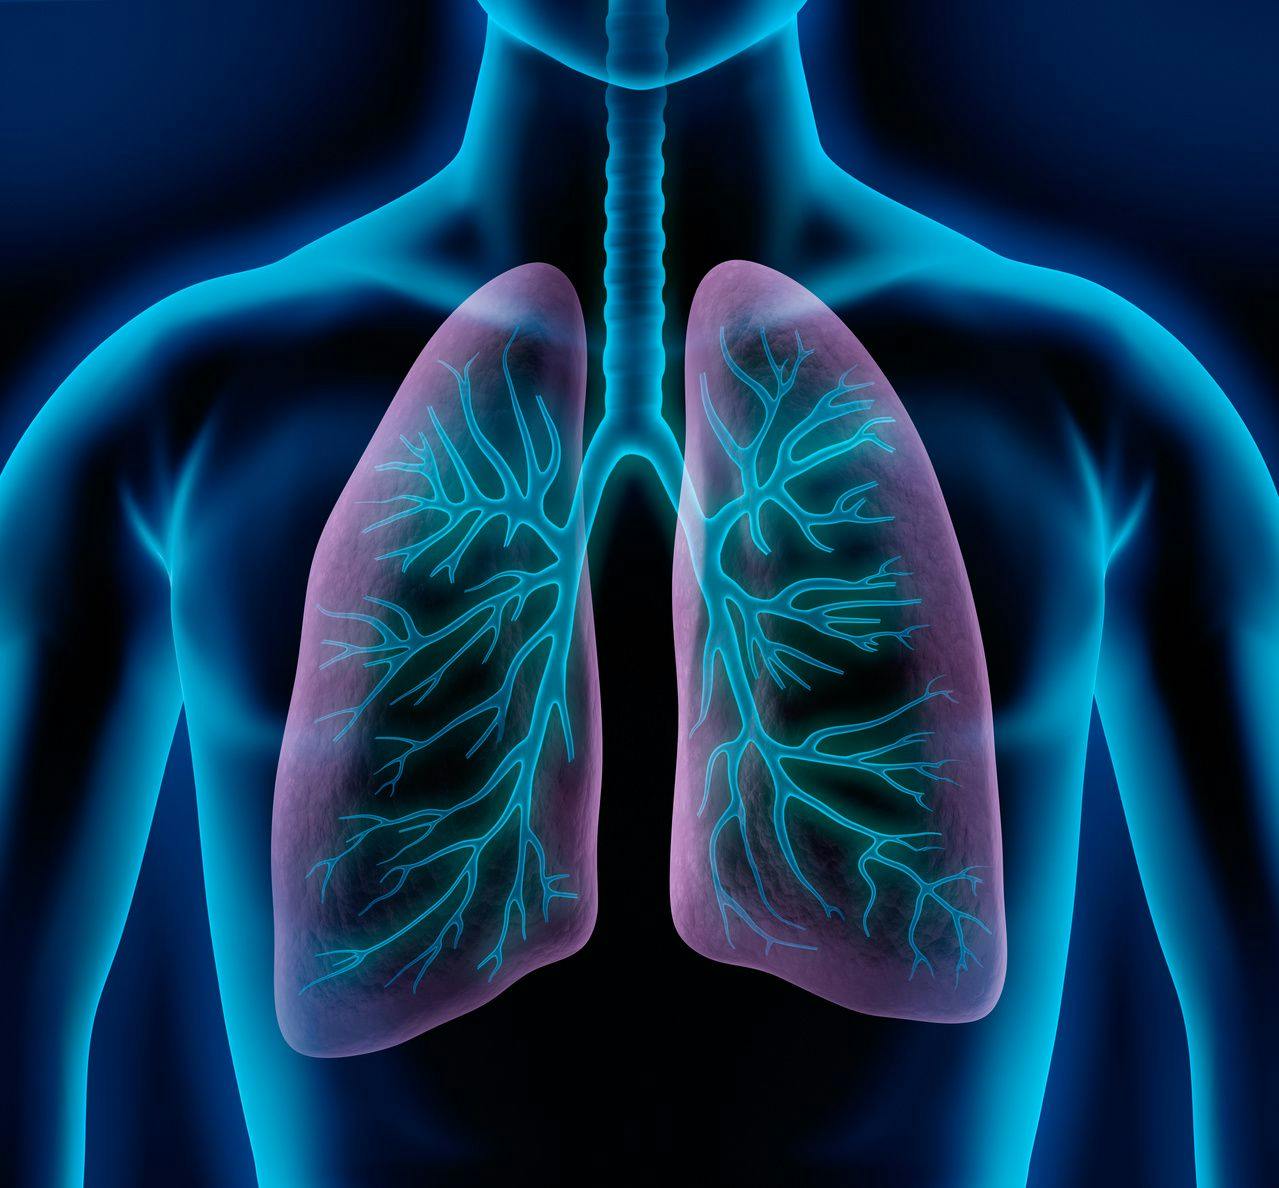 Researchers Propose New Tool for Managing COPD and Use of Inhaled Corticosteroids